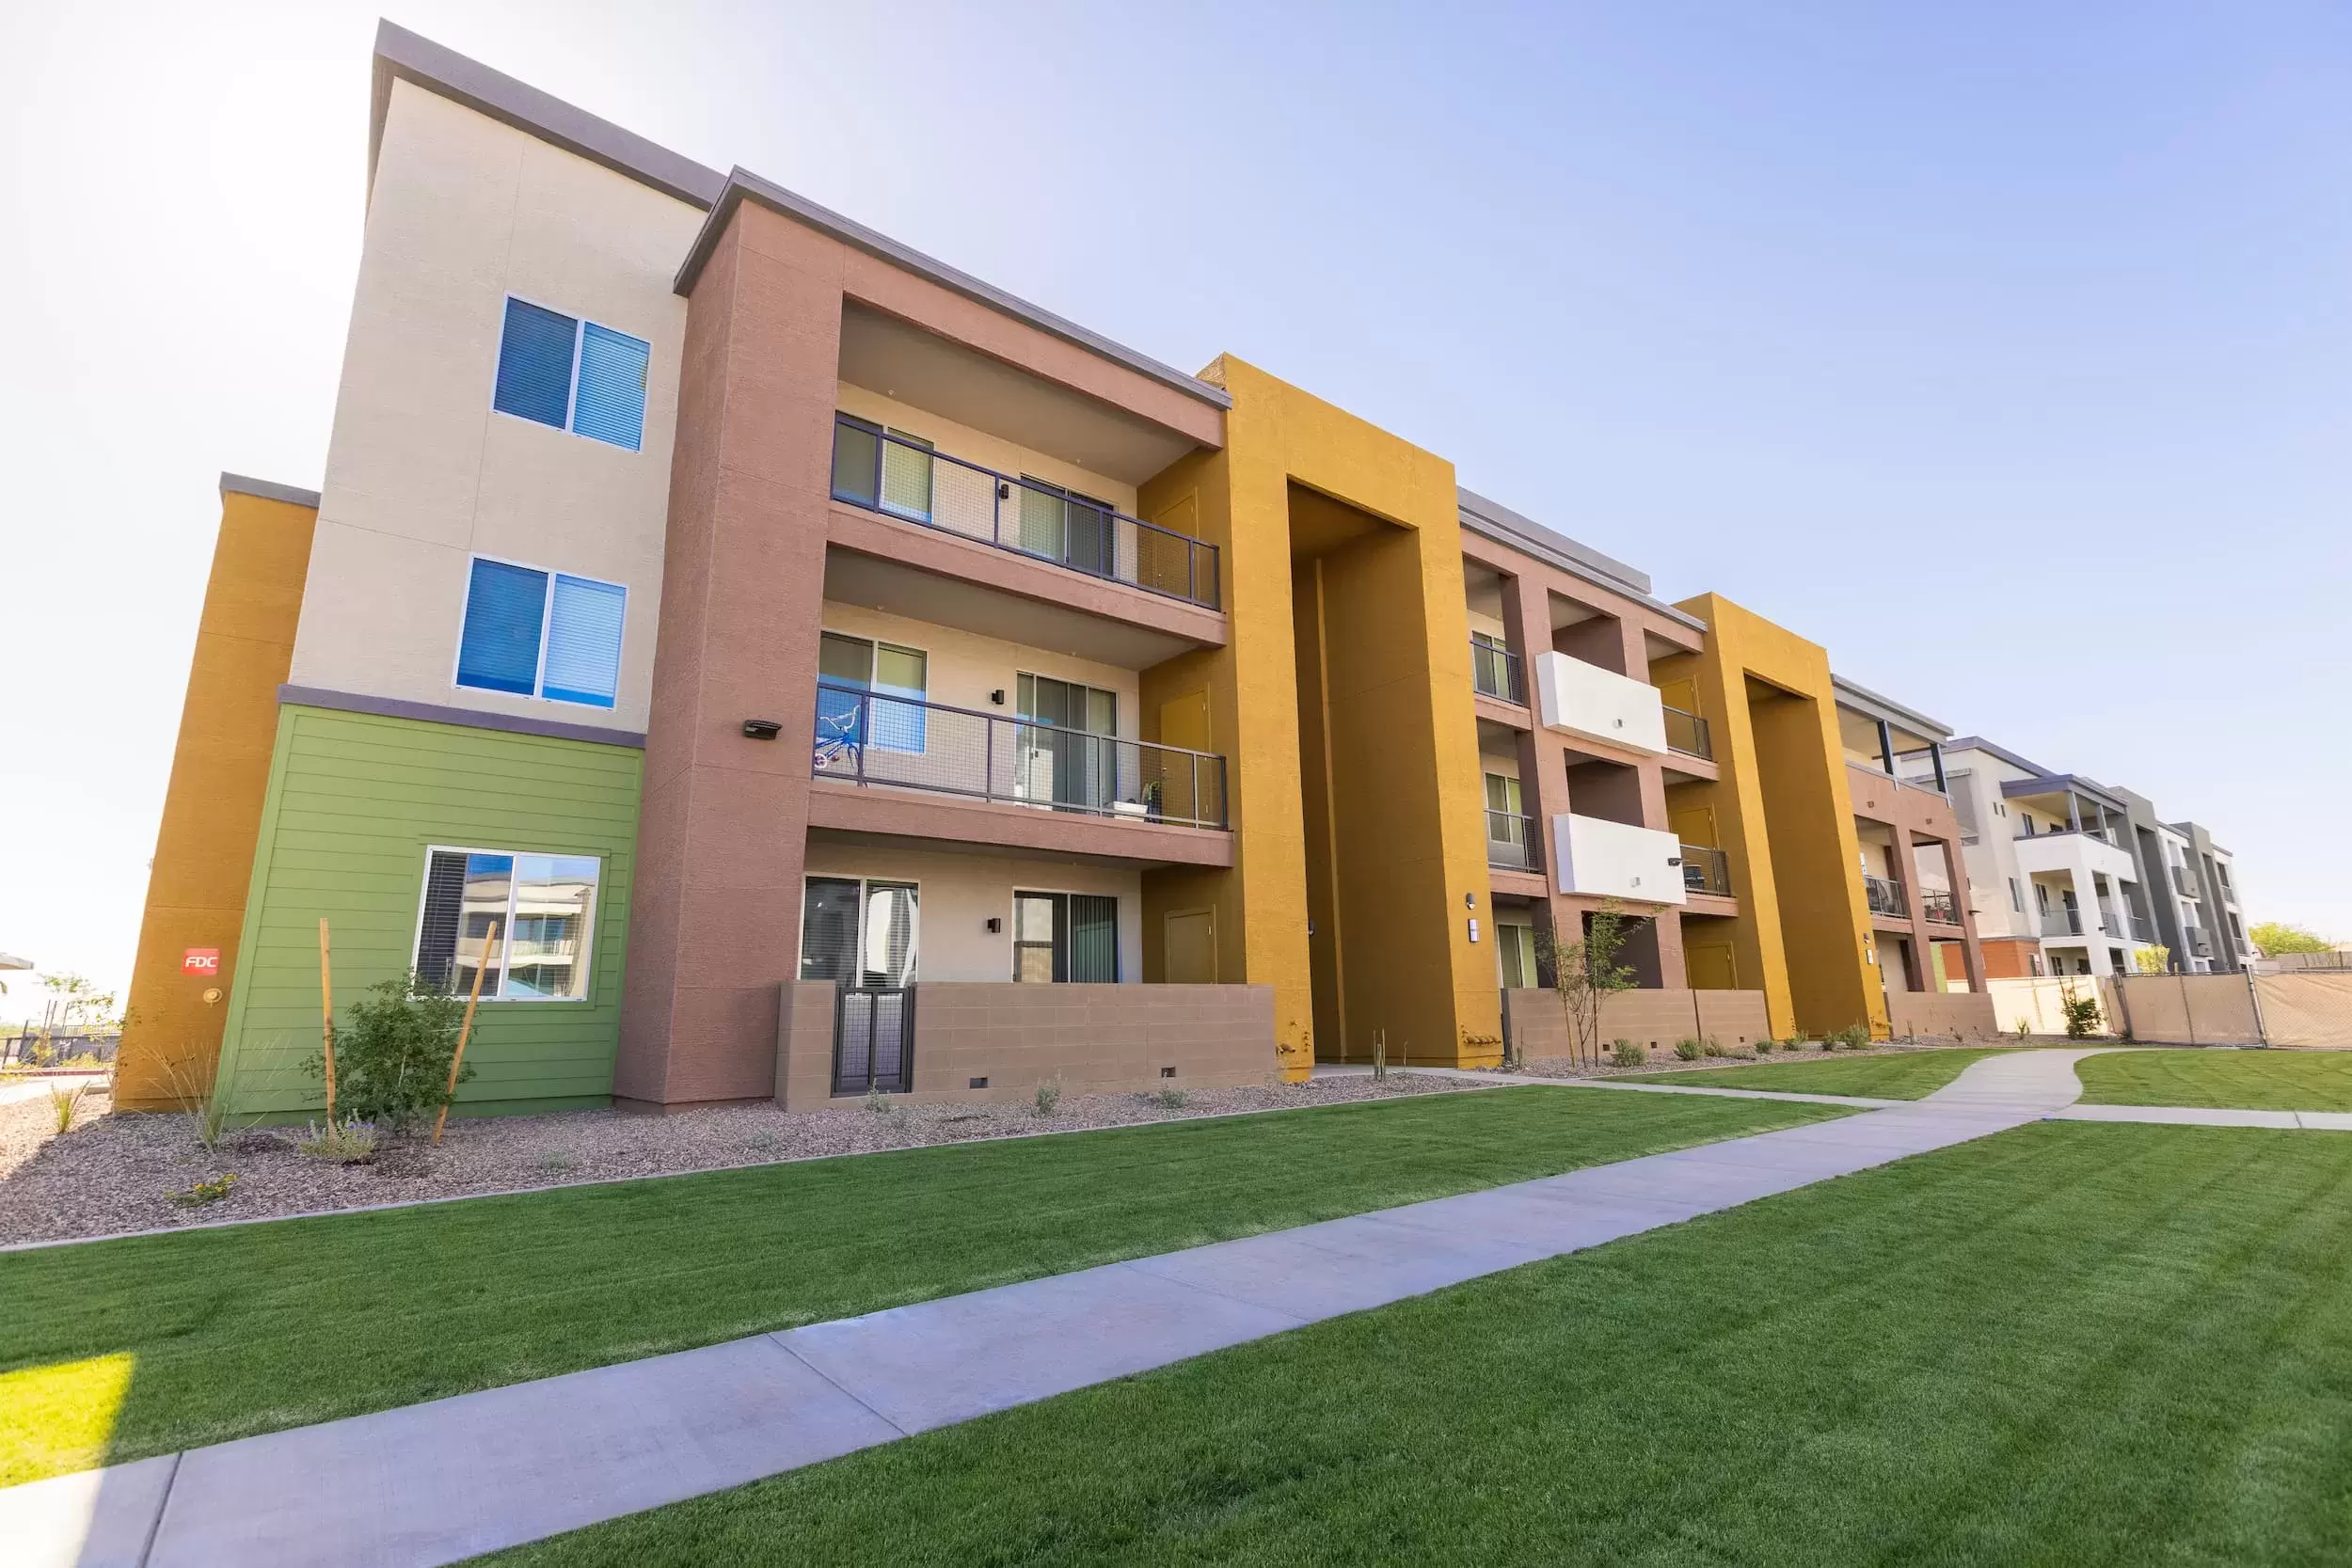 A view of the exterior of Liv Crossroads apartment buildings with a manicured lawn and tidy landscaping.